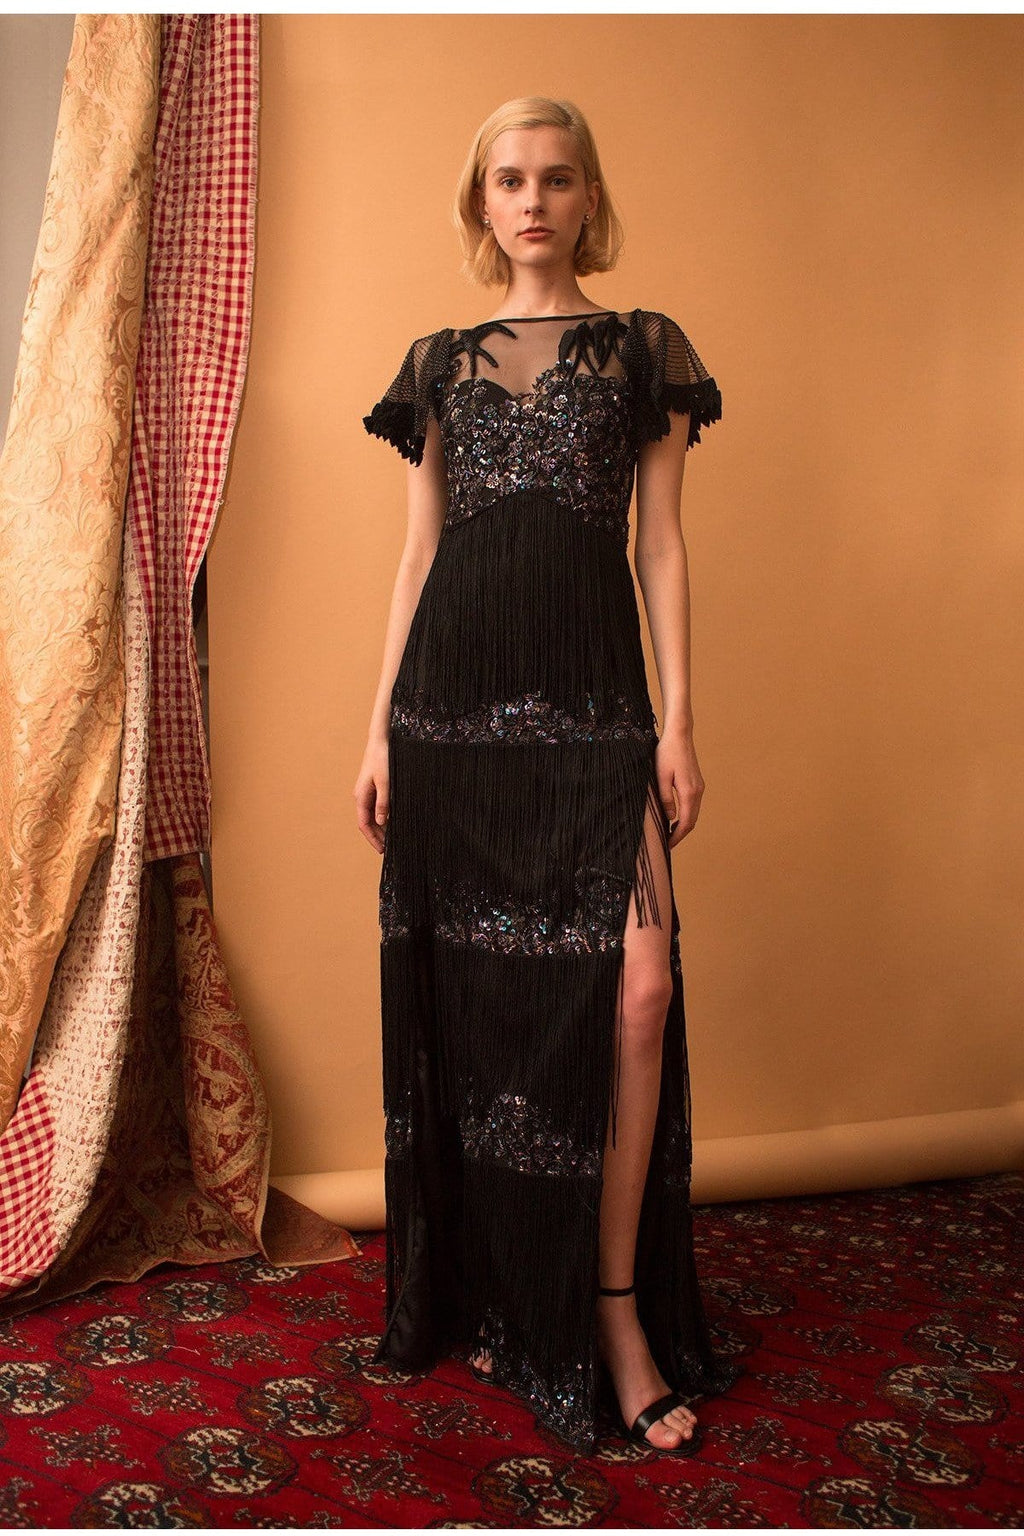 Lavanya Coodly Women - Apparel - Dresses - Cocktail XS / Black Lavanya Coodly Women's Clara Hand-Beaded Boat Neck Black Evening Gown with Butterfly Sleeves